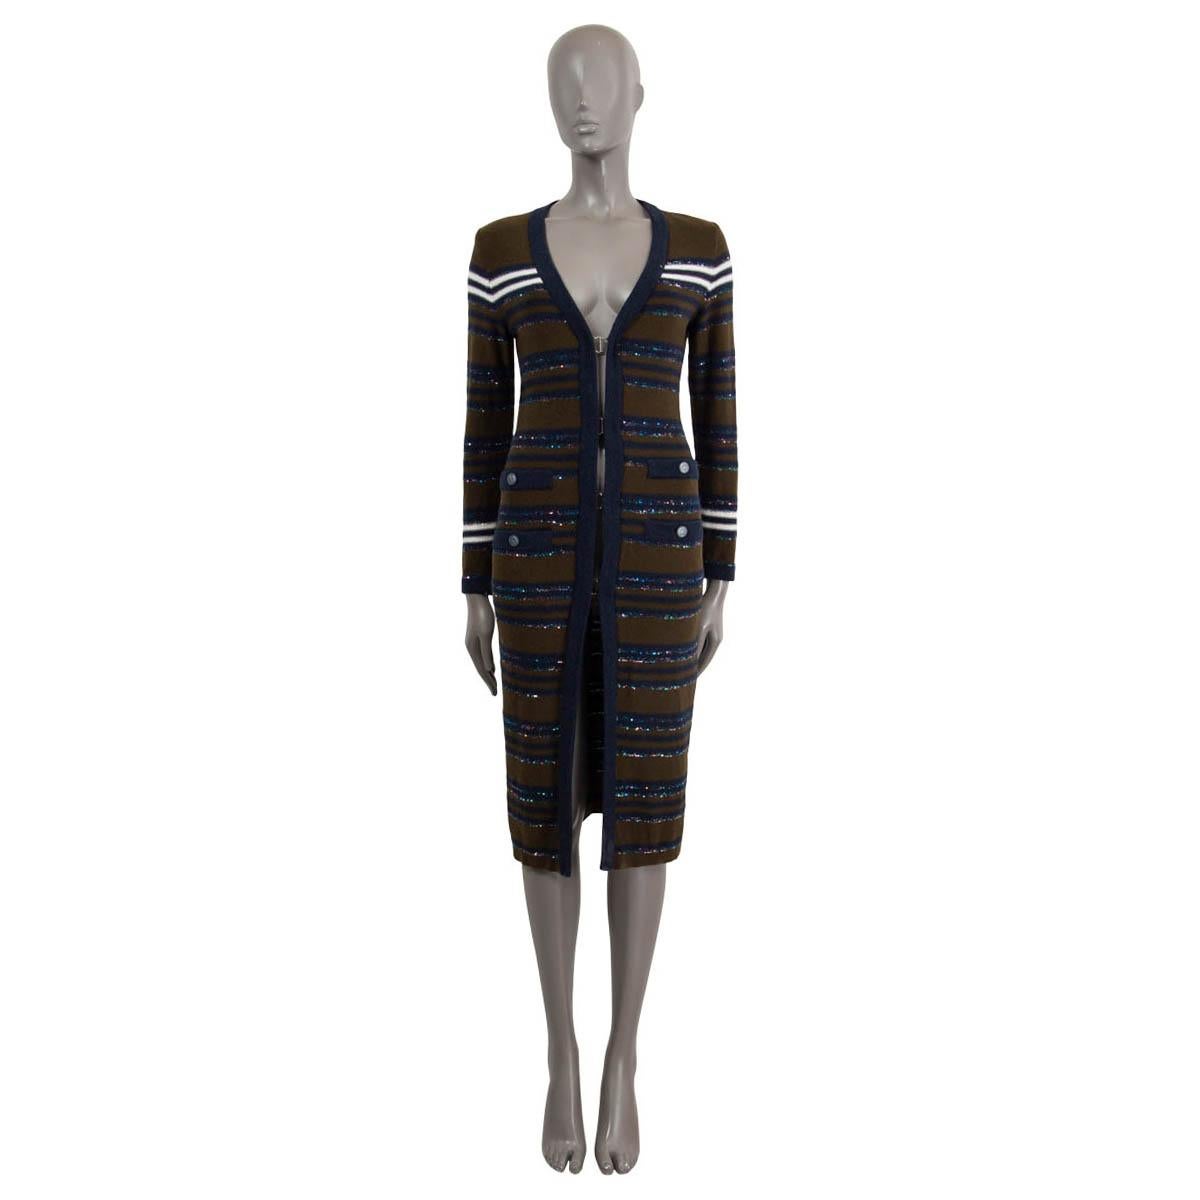 100% authentic Chanel long striped knit cardigan in olive green, navy blue and off-white cashmere (92%), polyester (5%) and polyamide (3%). Embellished with multicolor sequins and four buttoned pockets, the two on top are faux. Opens with four hooks